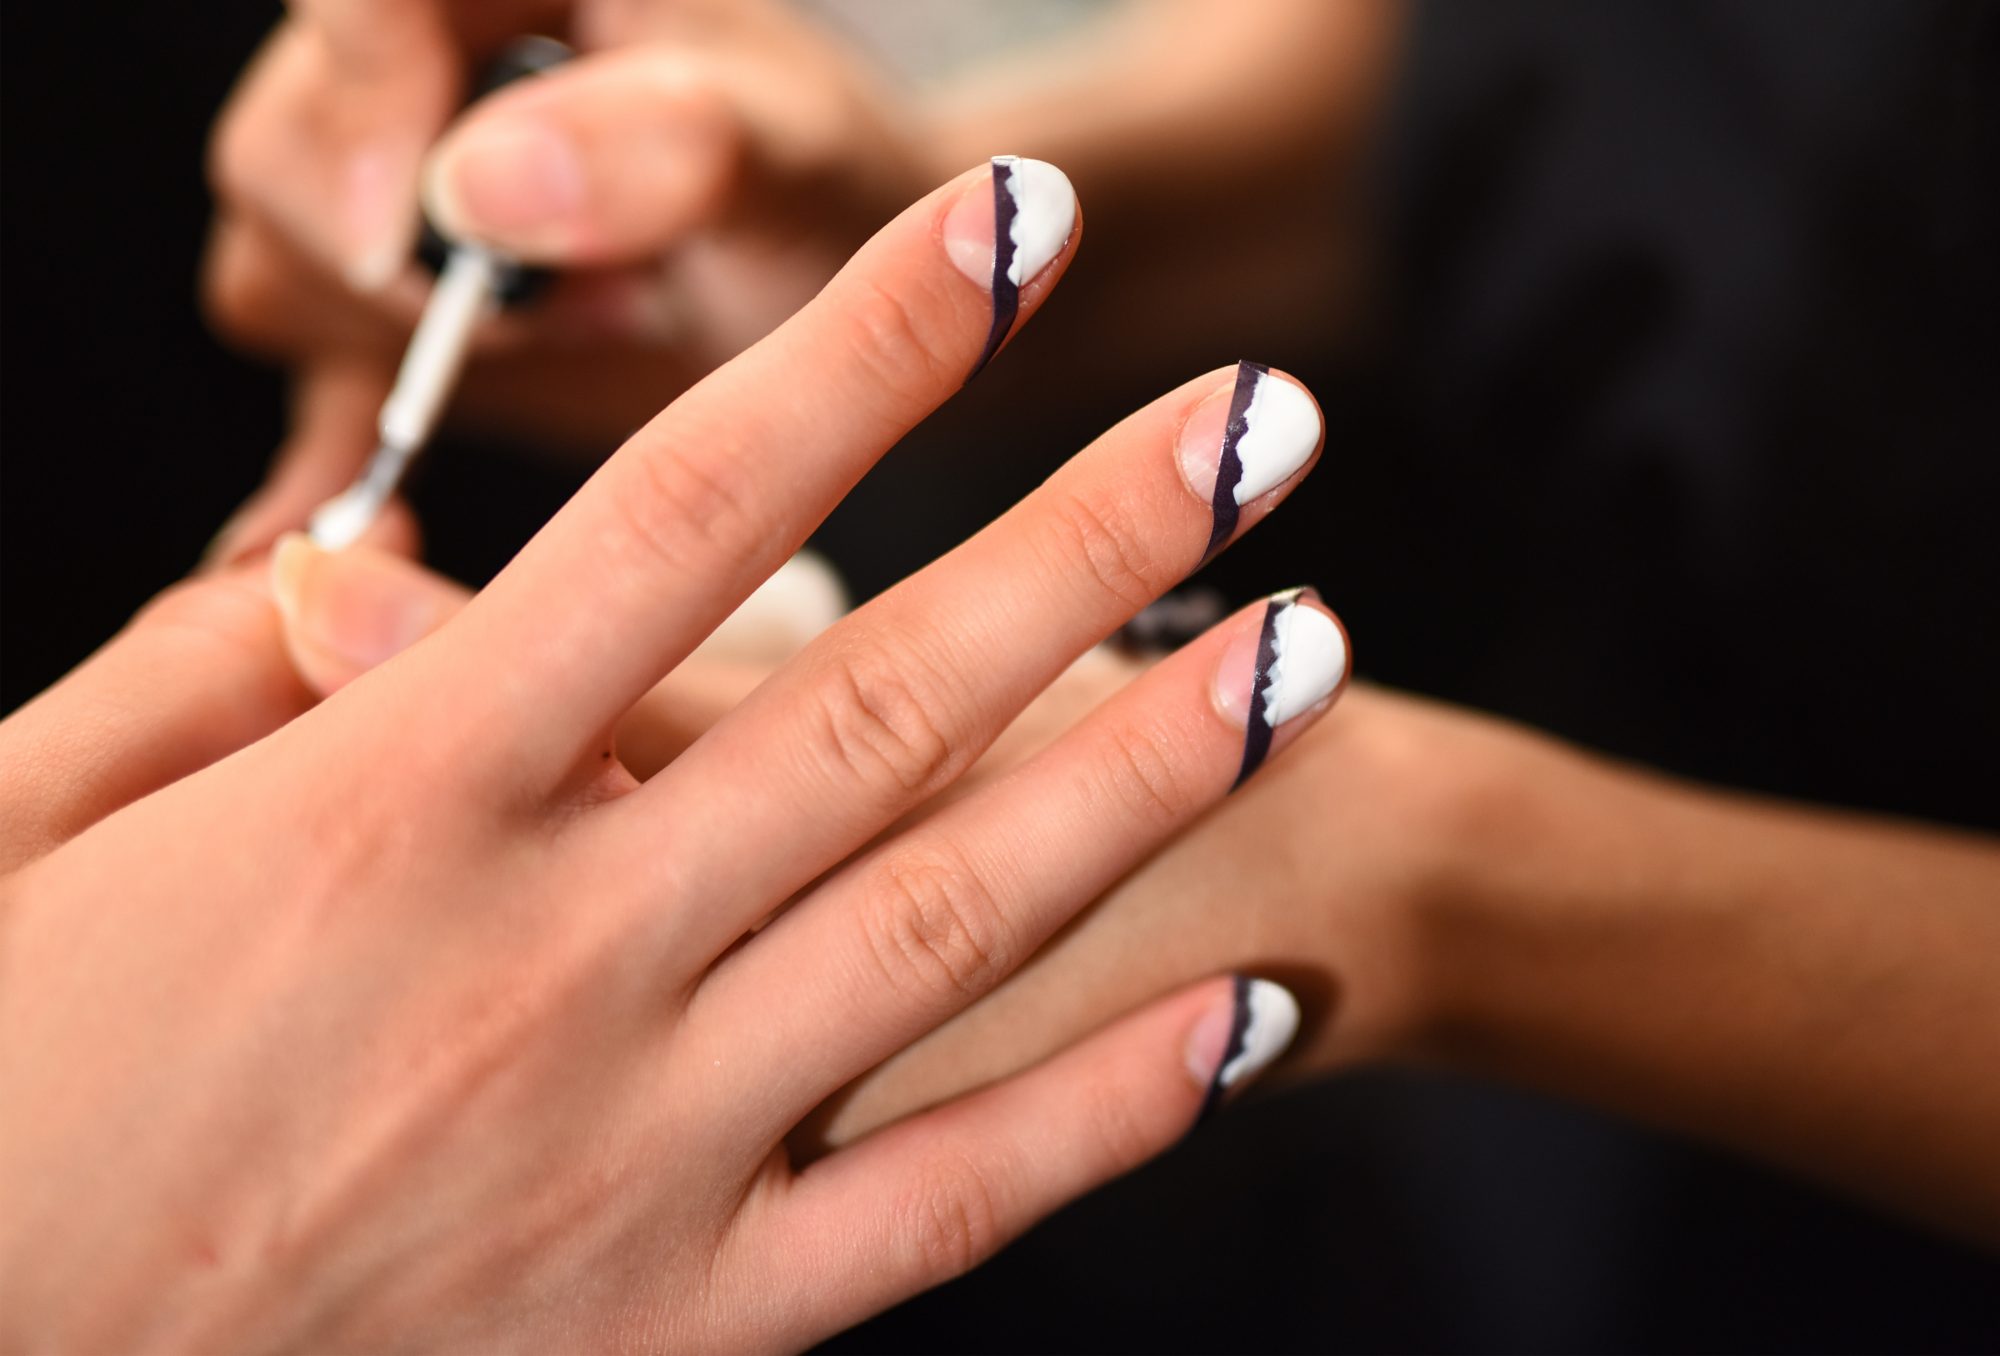 picture-of-nyfw-nails-striped-photo.jpg